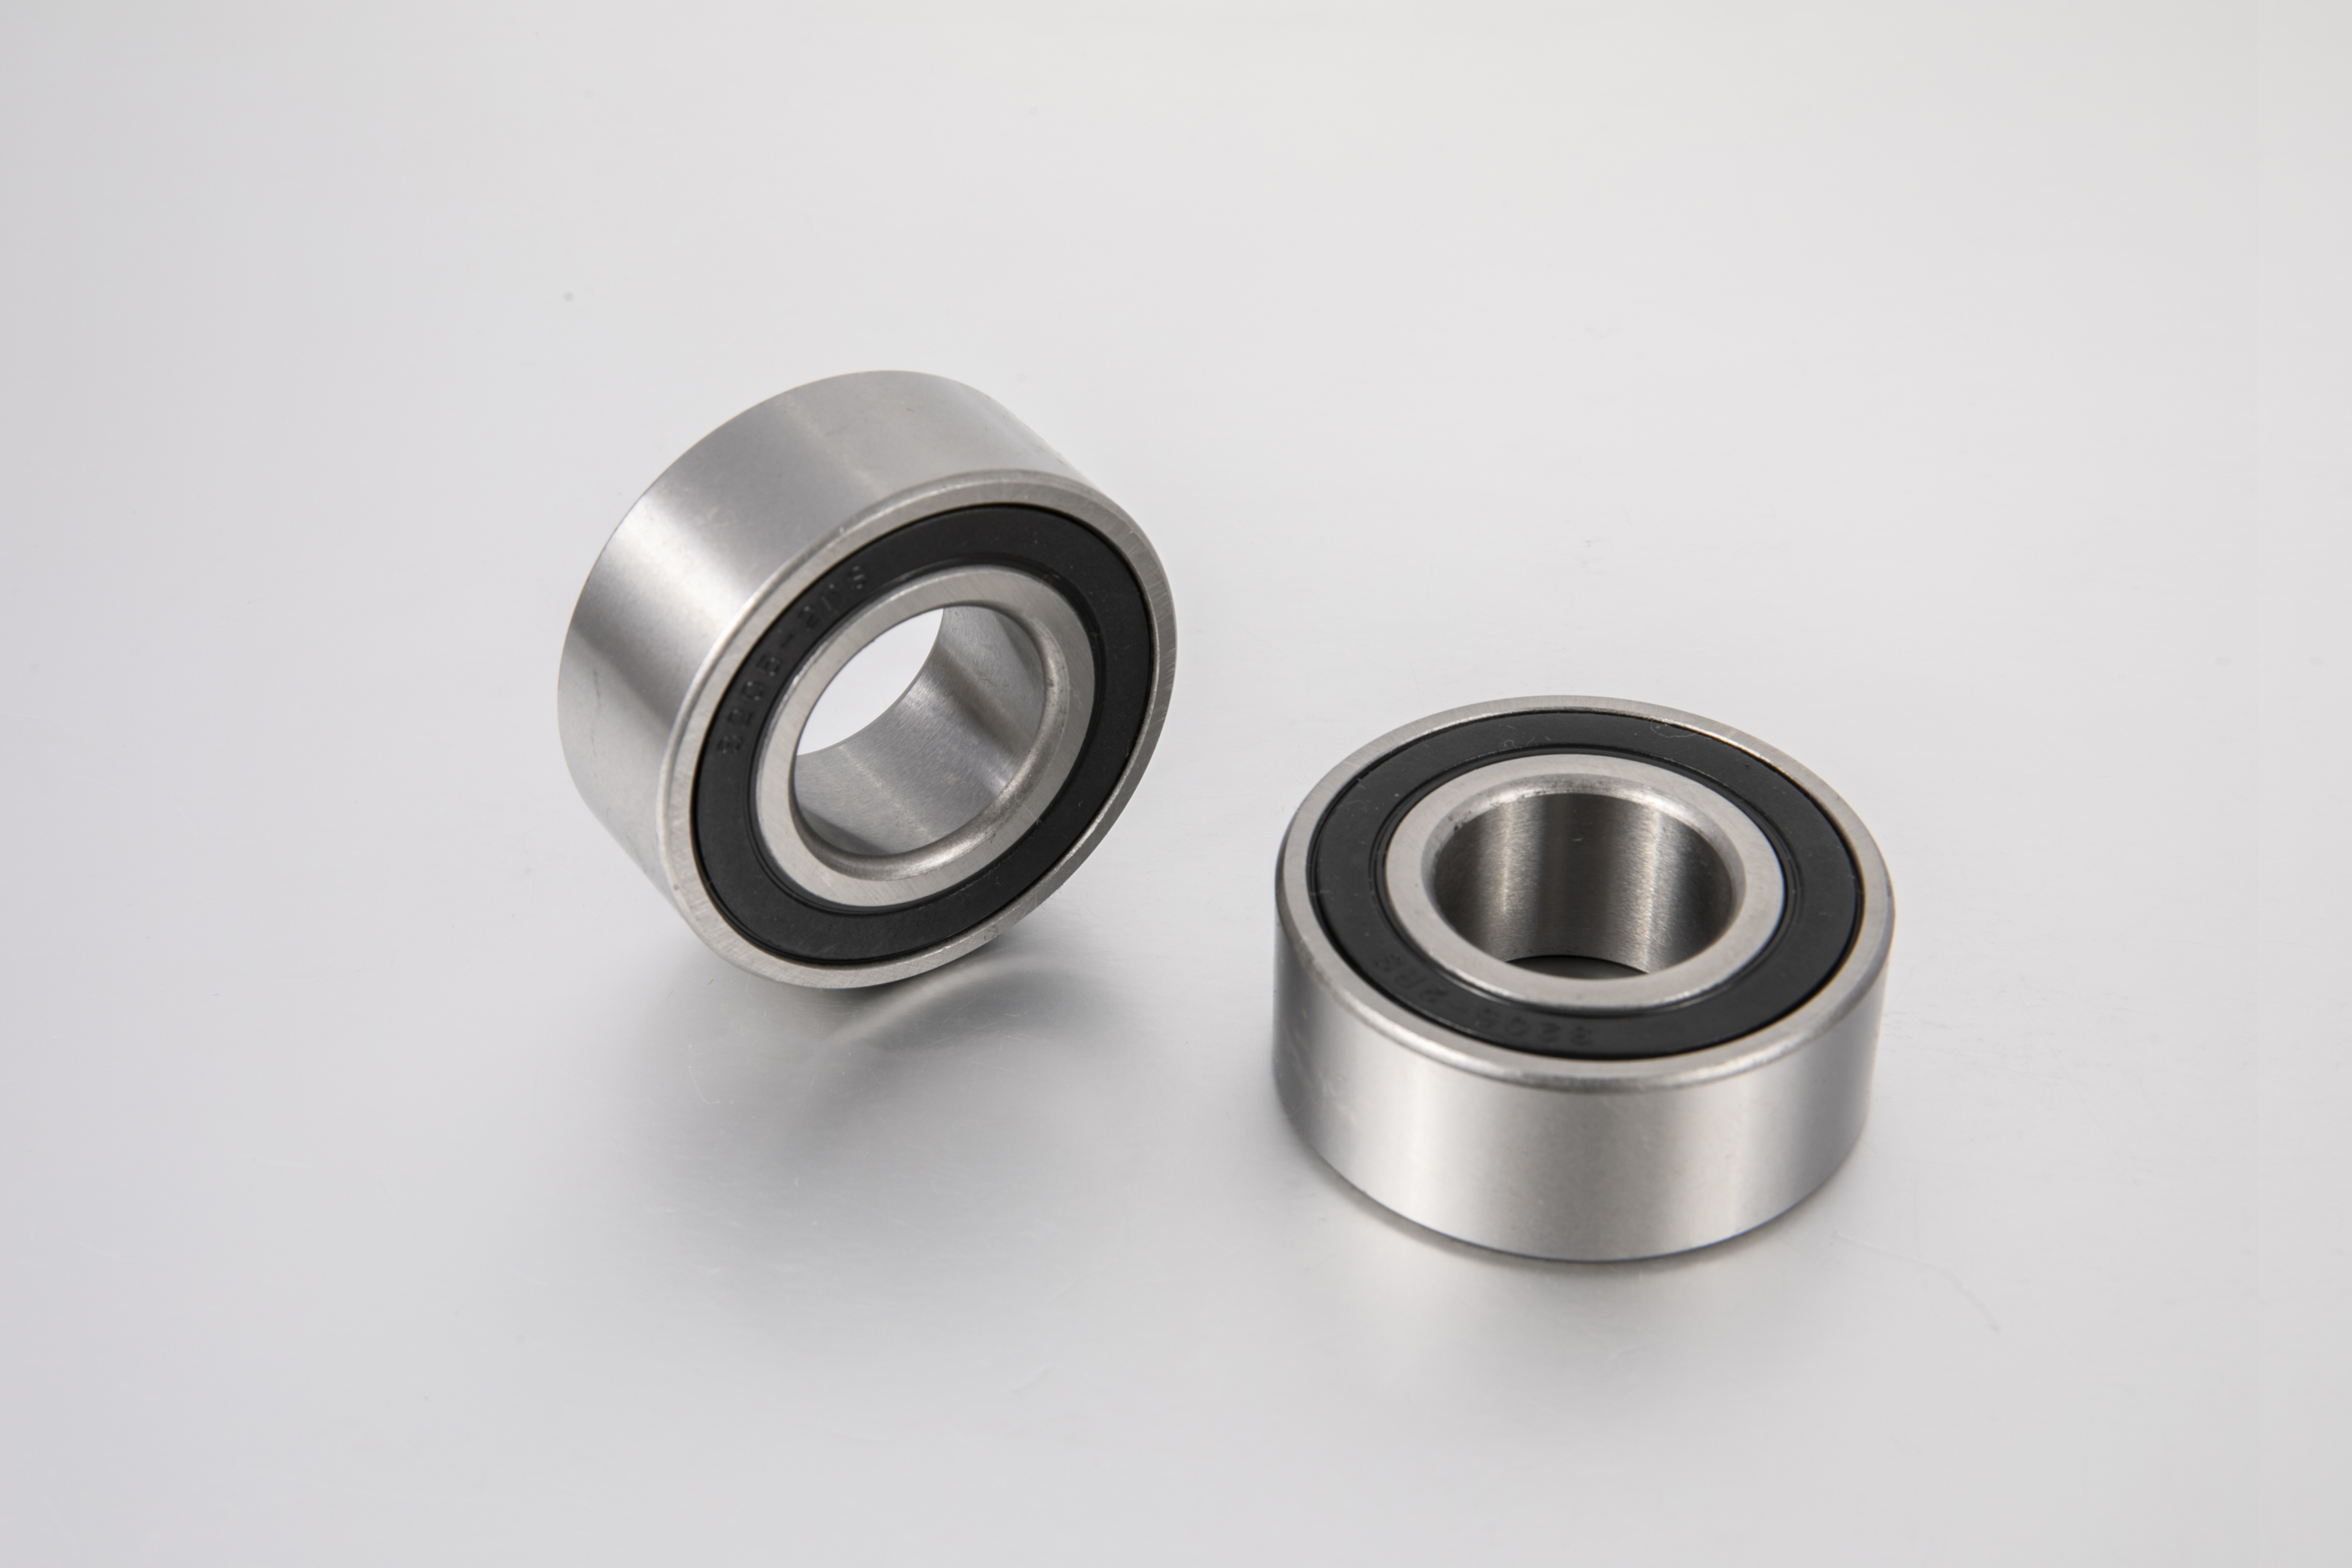 What Are The Clearance Classifications Of Taper Roller Bearings?